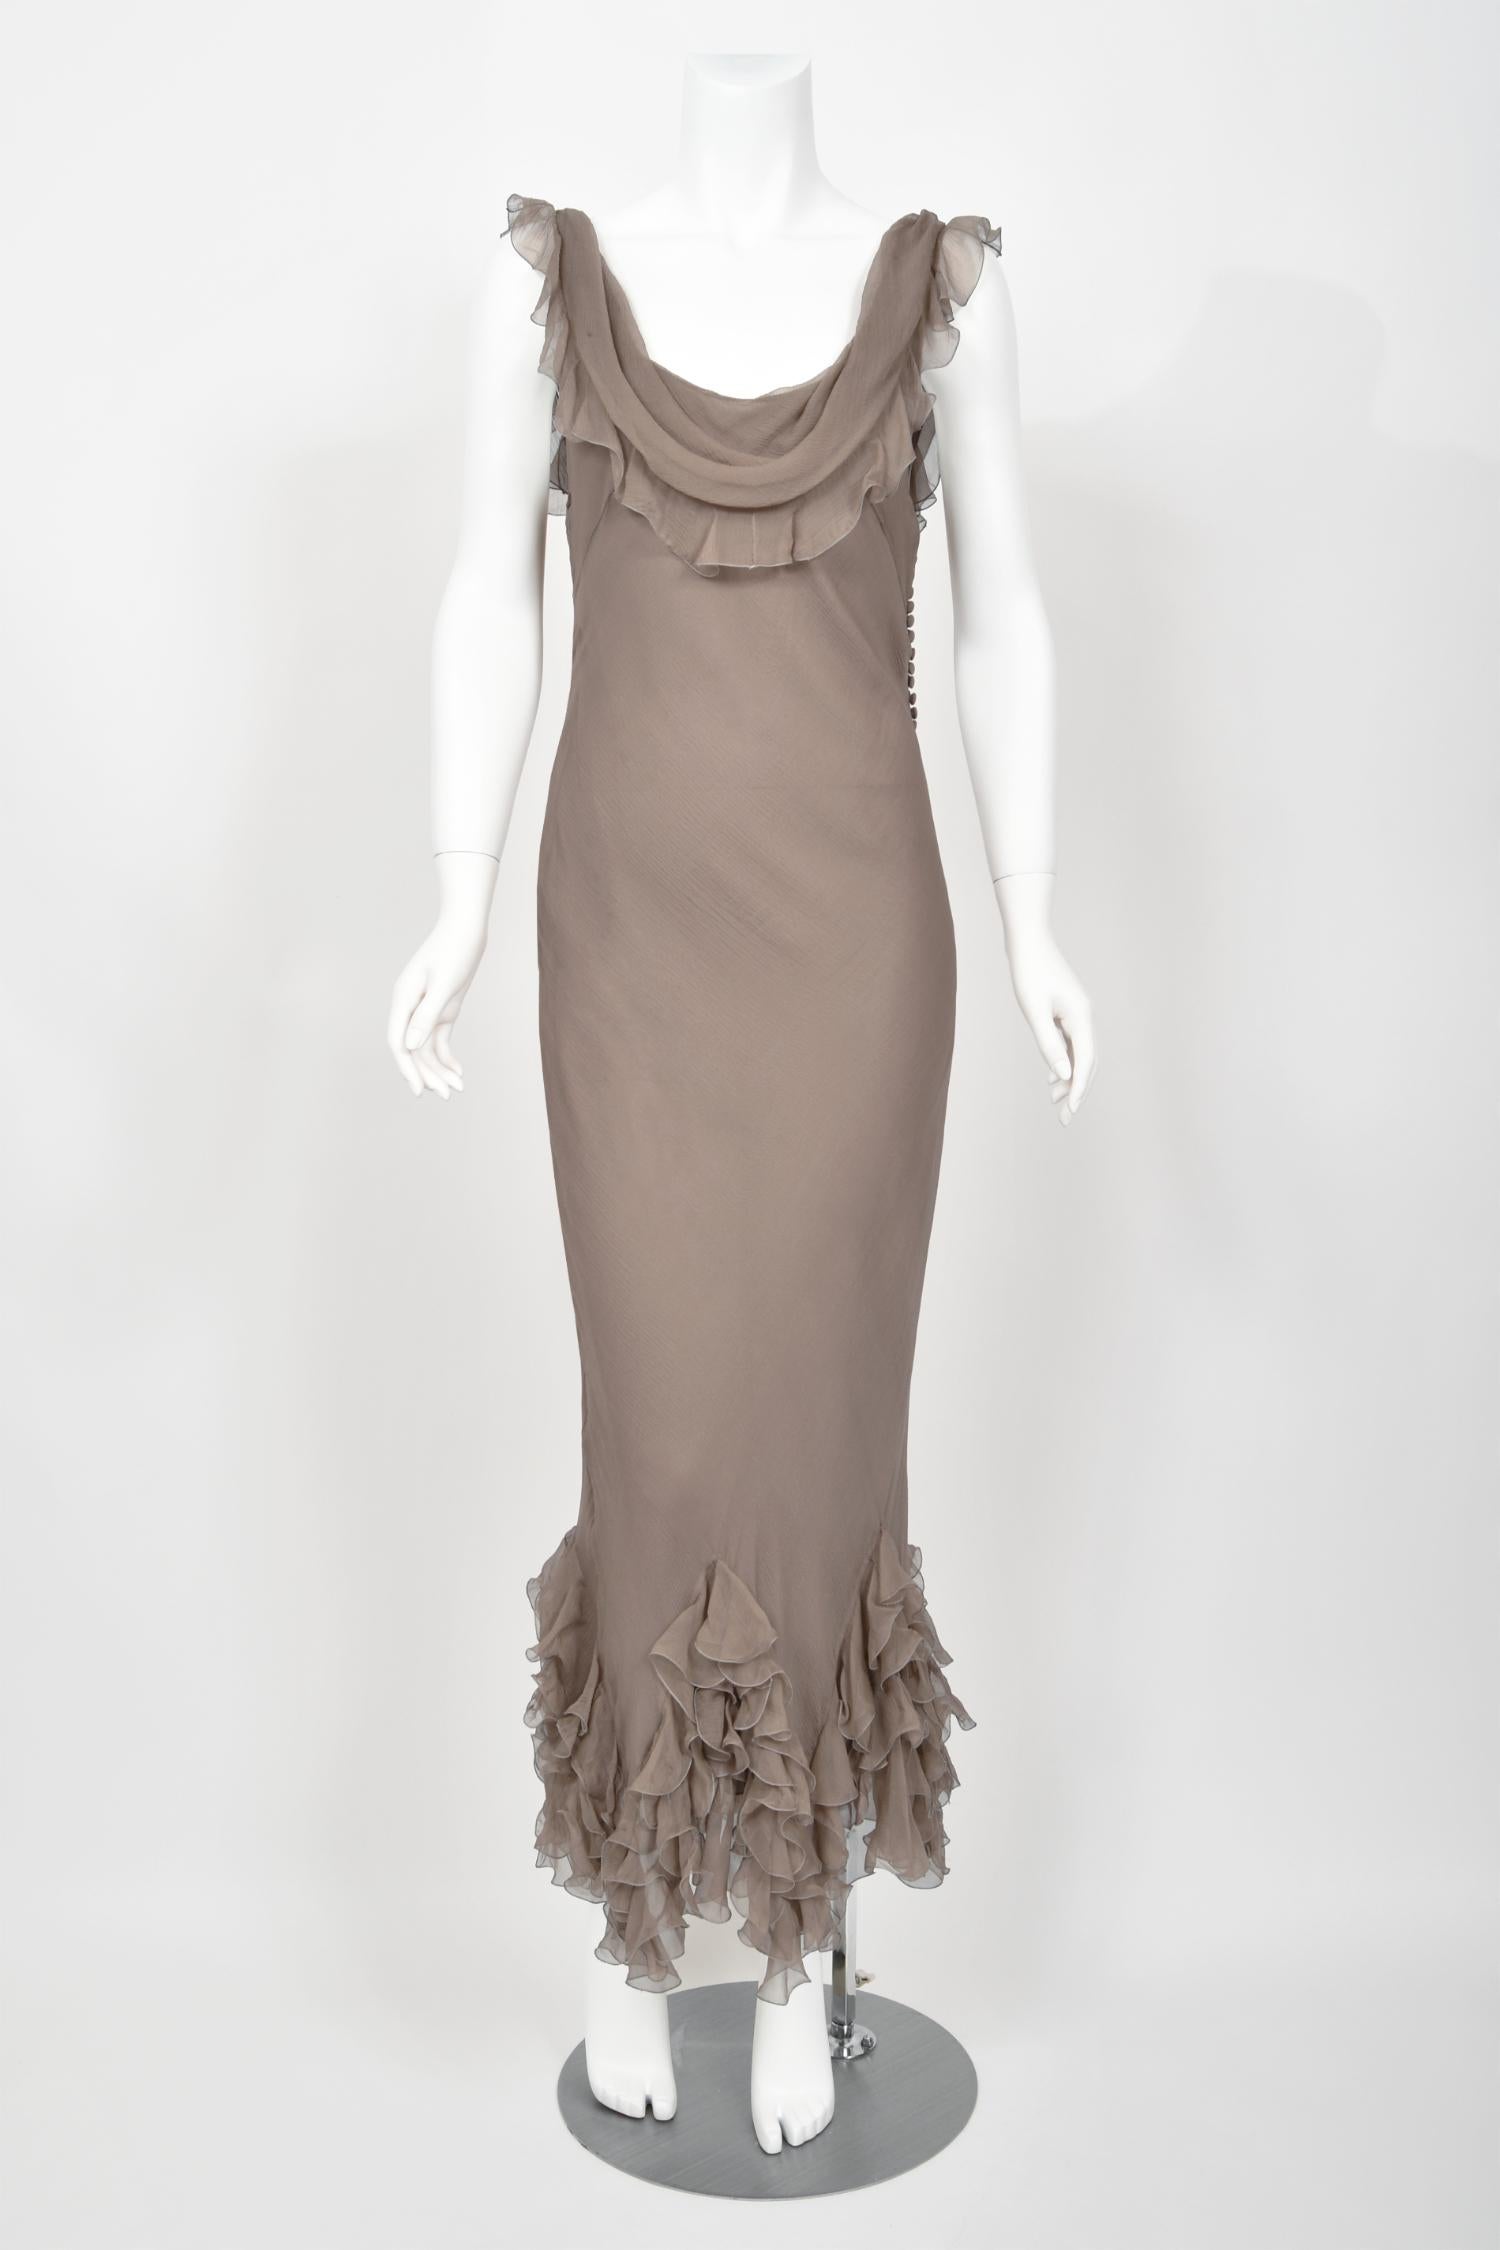 2006 Christian Dior by John Galliano Smoky Silk Tiered Ruffle Bias-Cut Gown For Sale 2